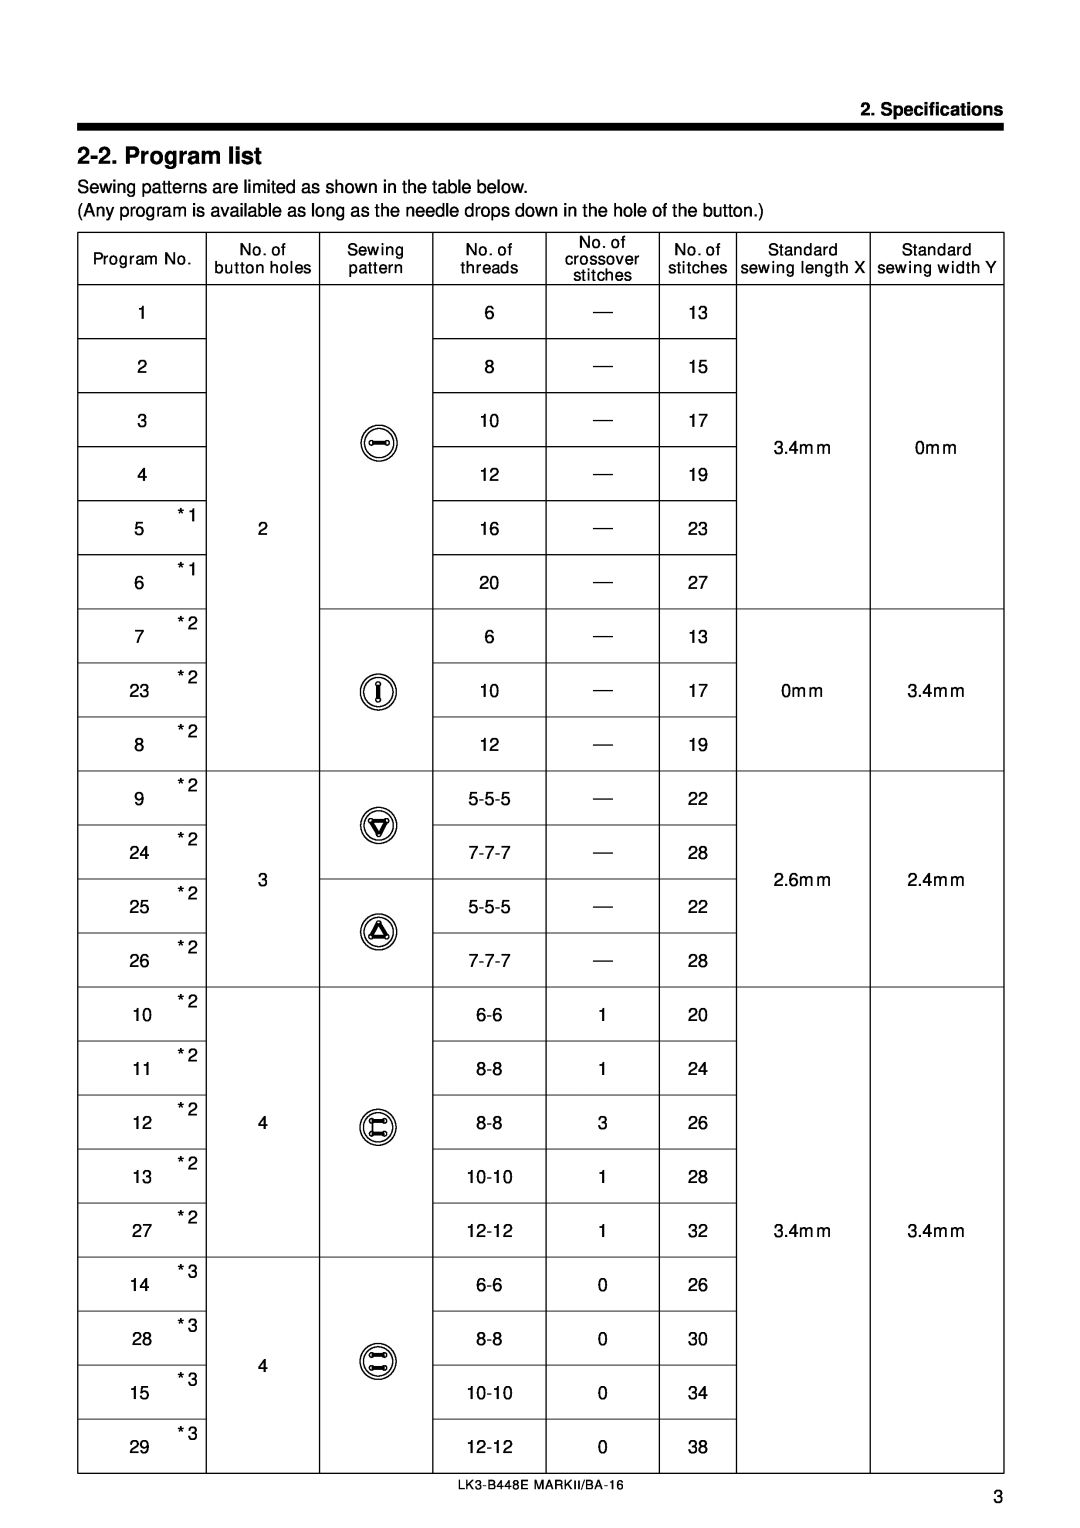 Brother LK3-B448E instruction manual Program list, Specifications, Sewing patterns are limited as shown in the table below 